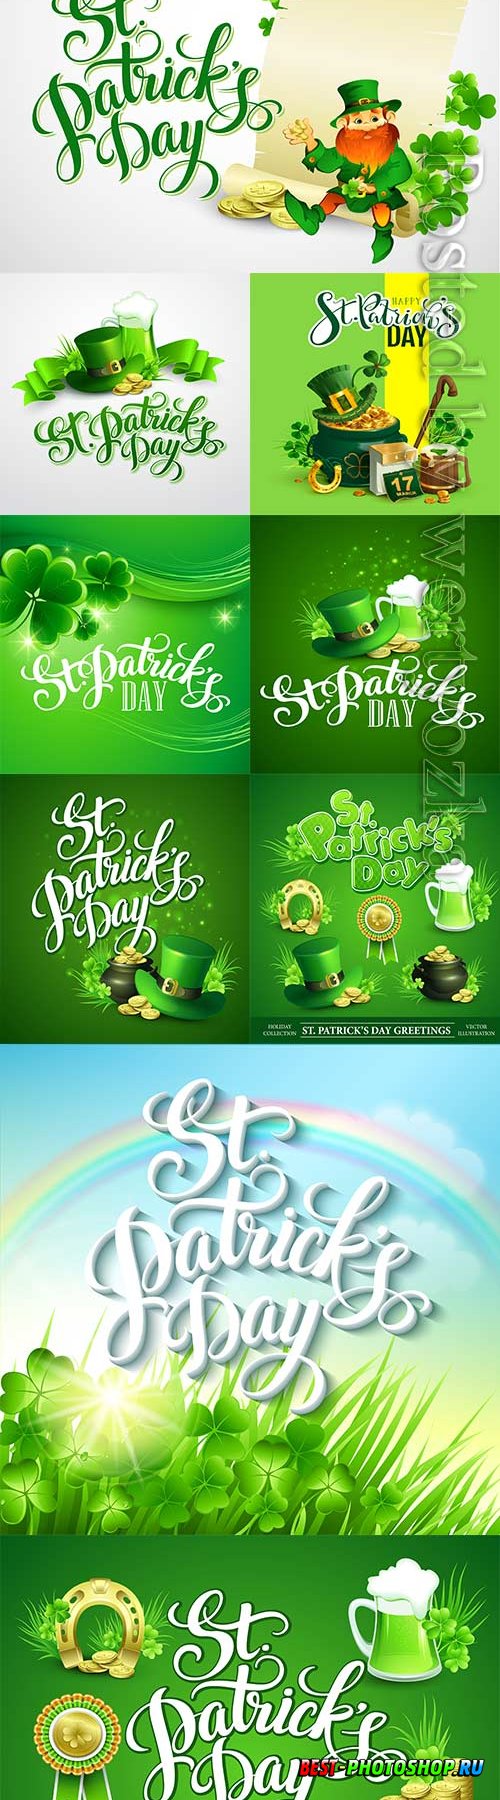 Happy saint patricks day greeting lettering vector background